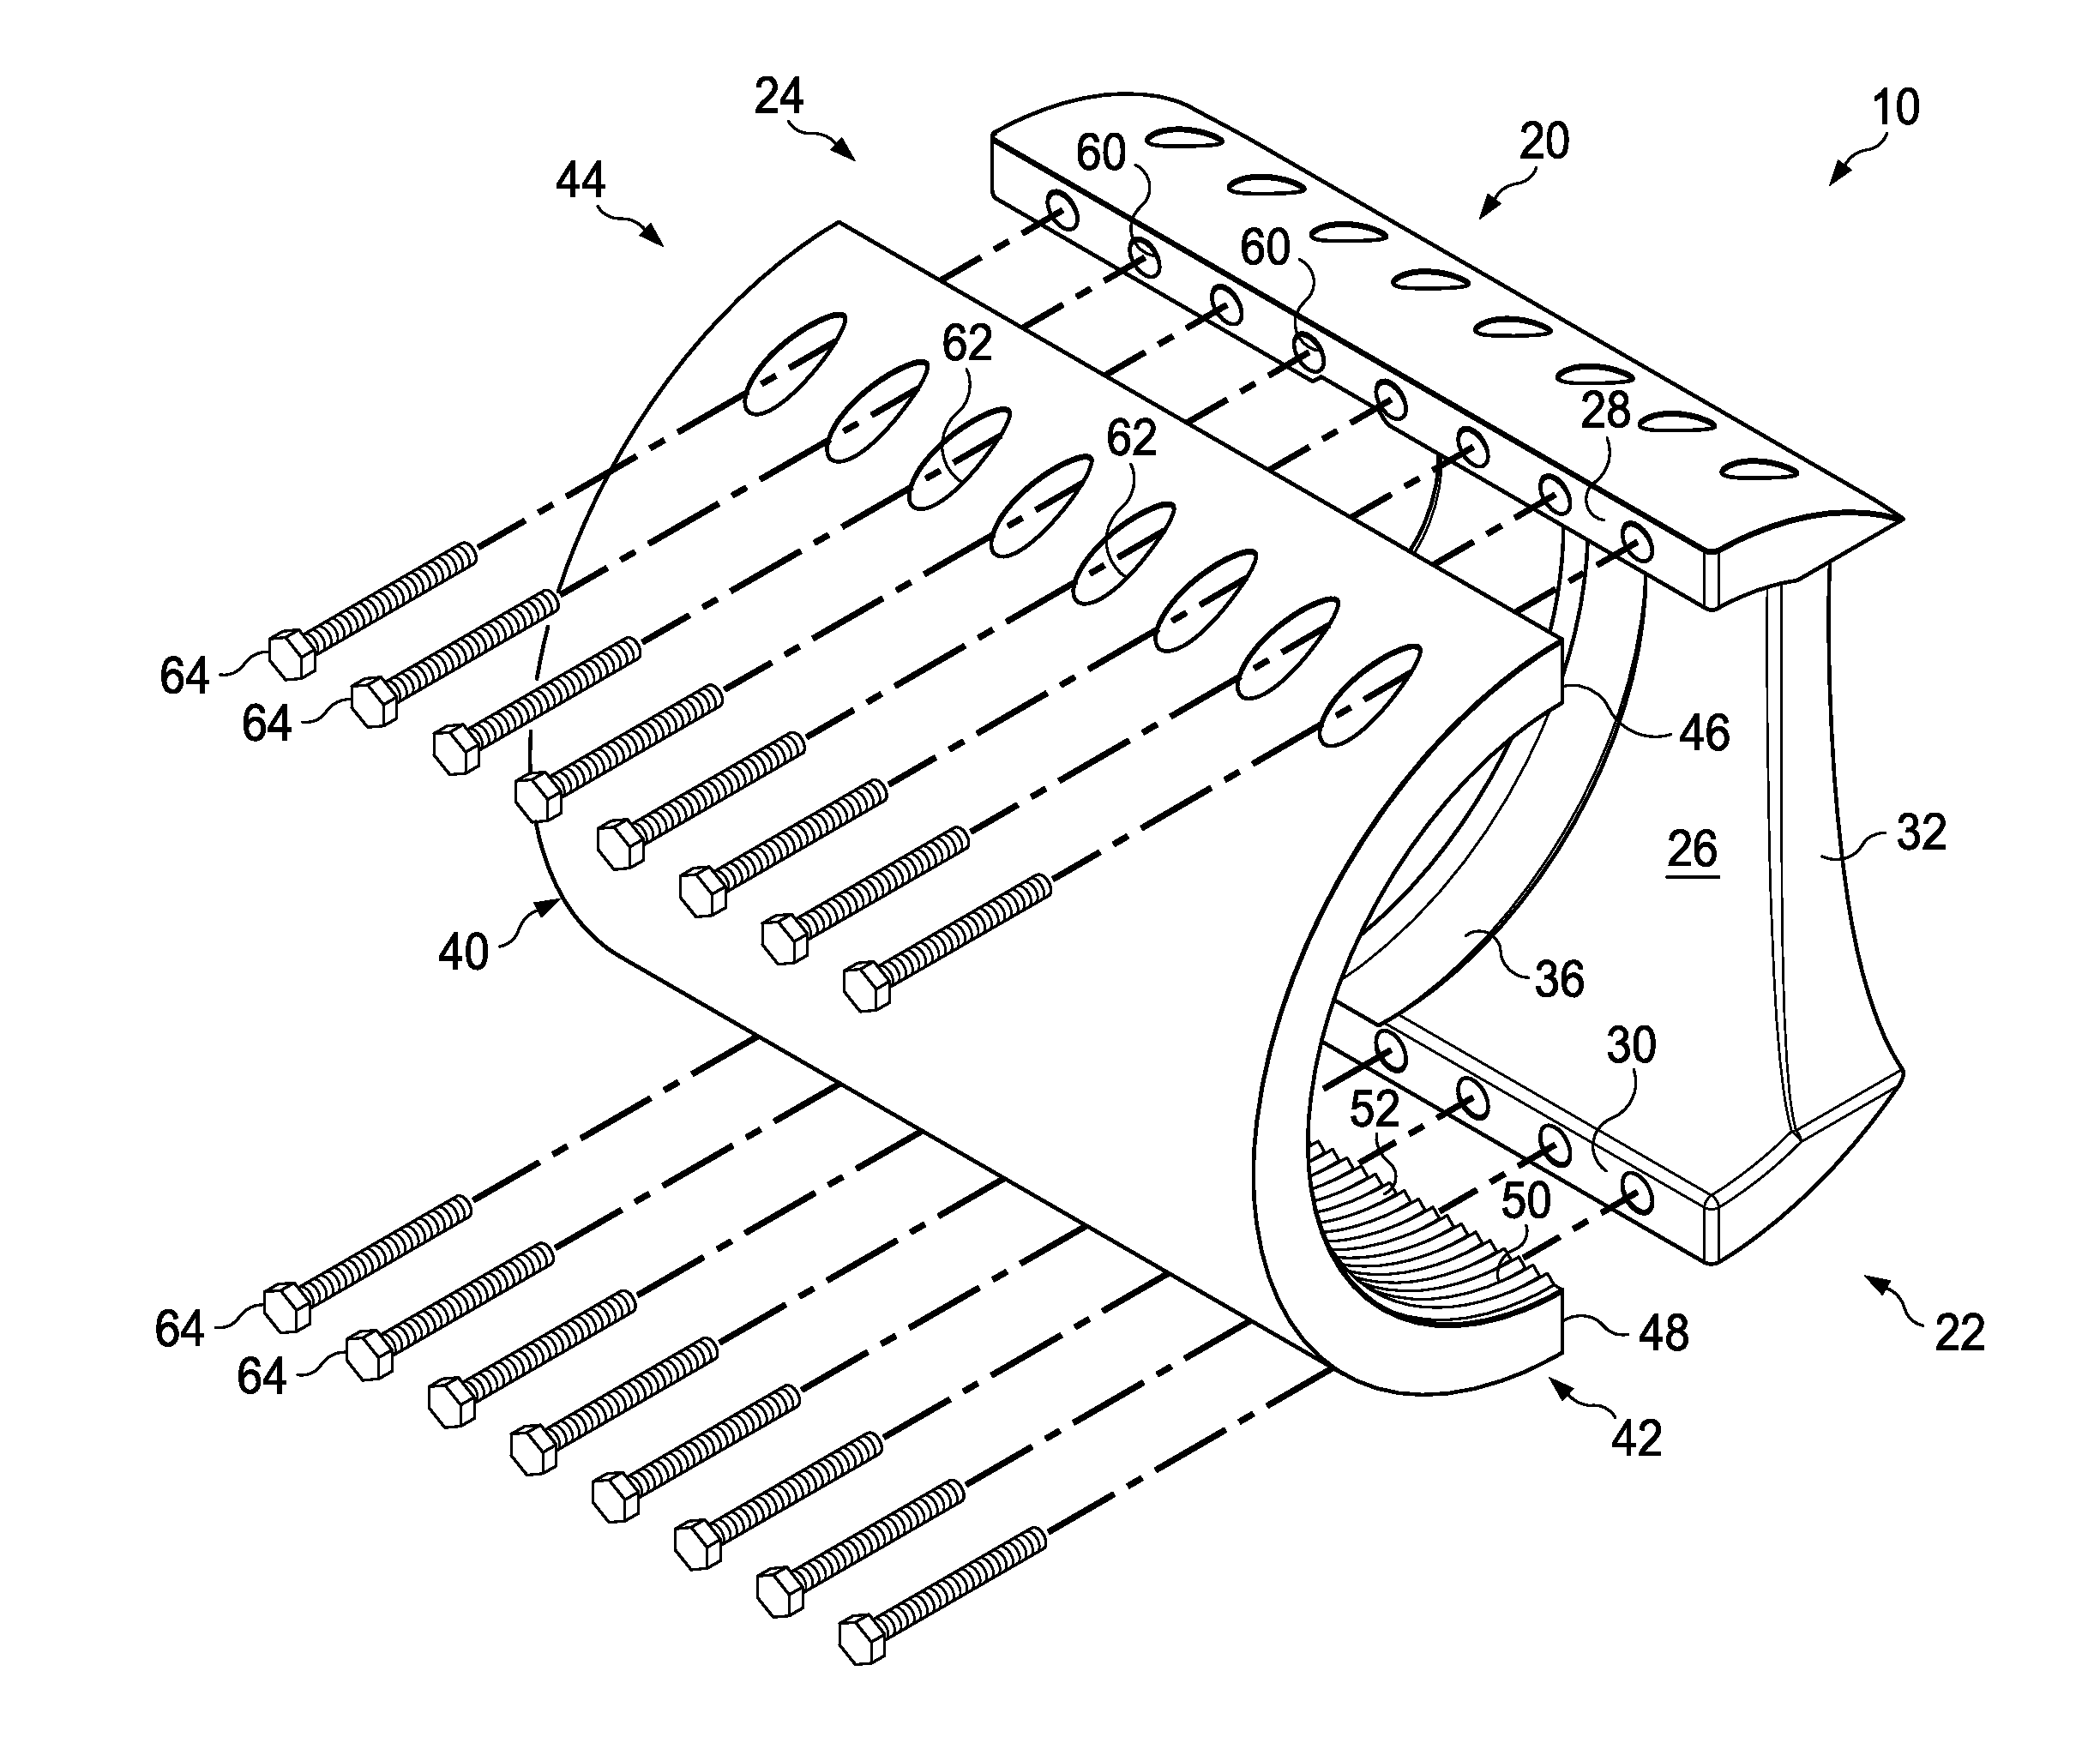 Clamp suitable for increasing the fatigue life of the butt welds of a pipe pressure vessel which is subsequently bent